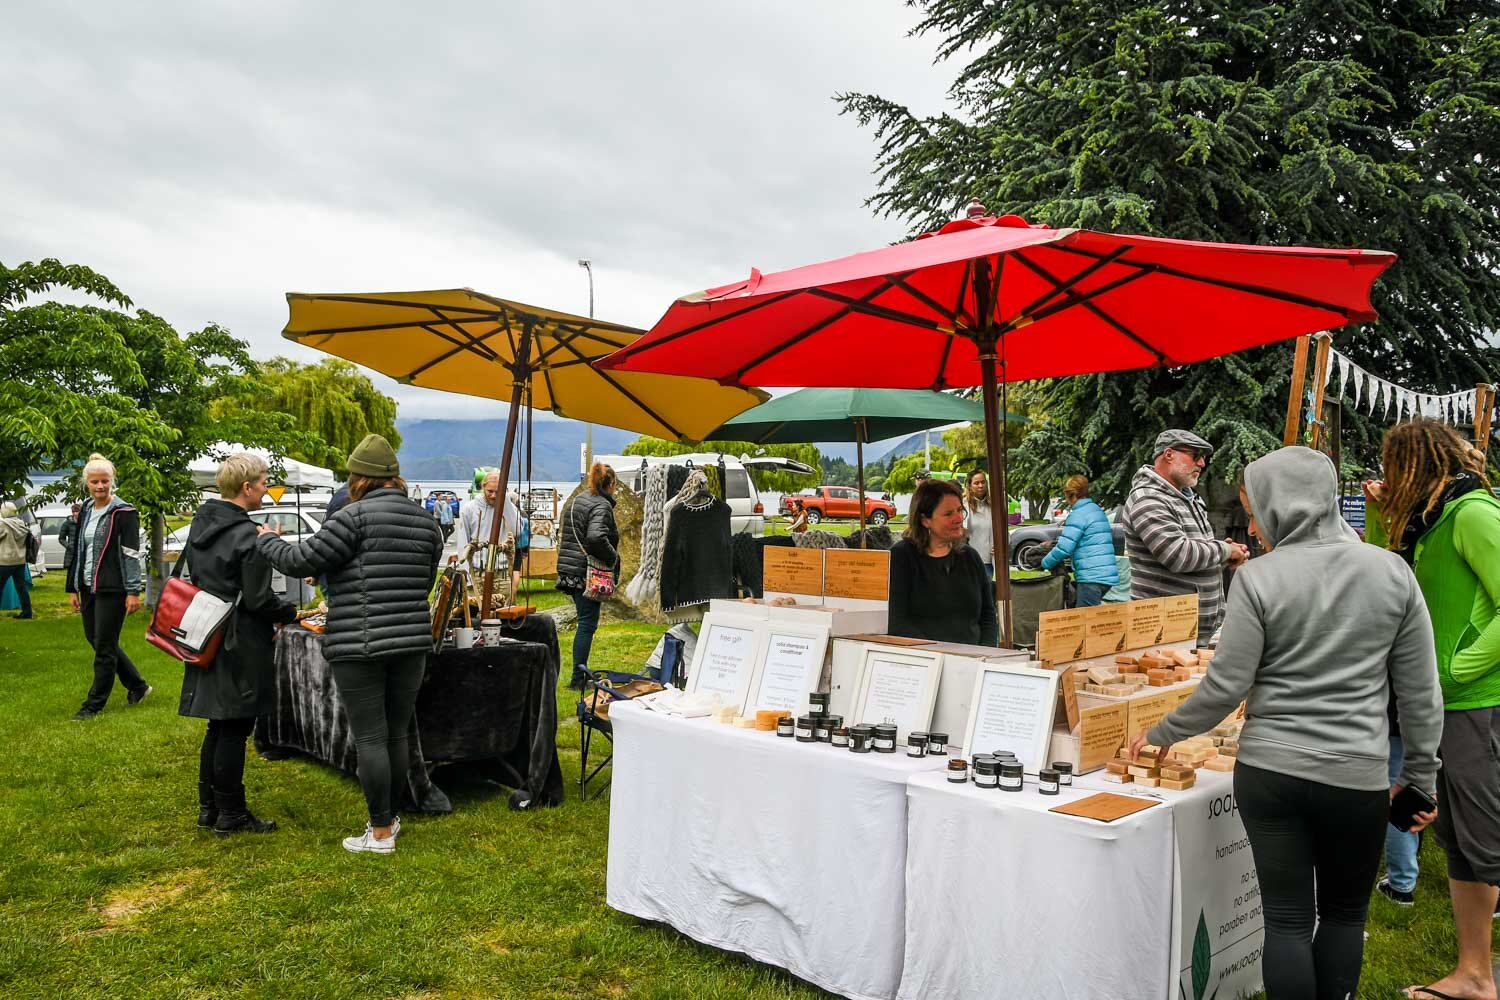 This shot is from a farmers market in Wanaka (I bought some handmade manuka honey body butter from this stand!).